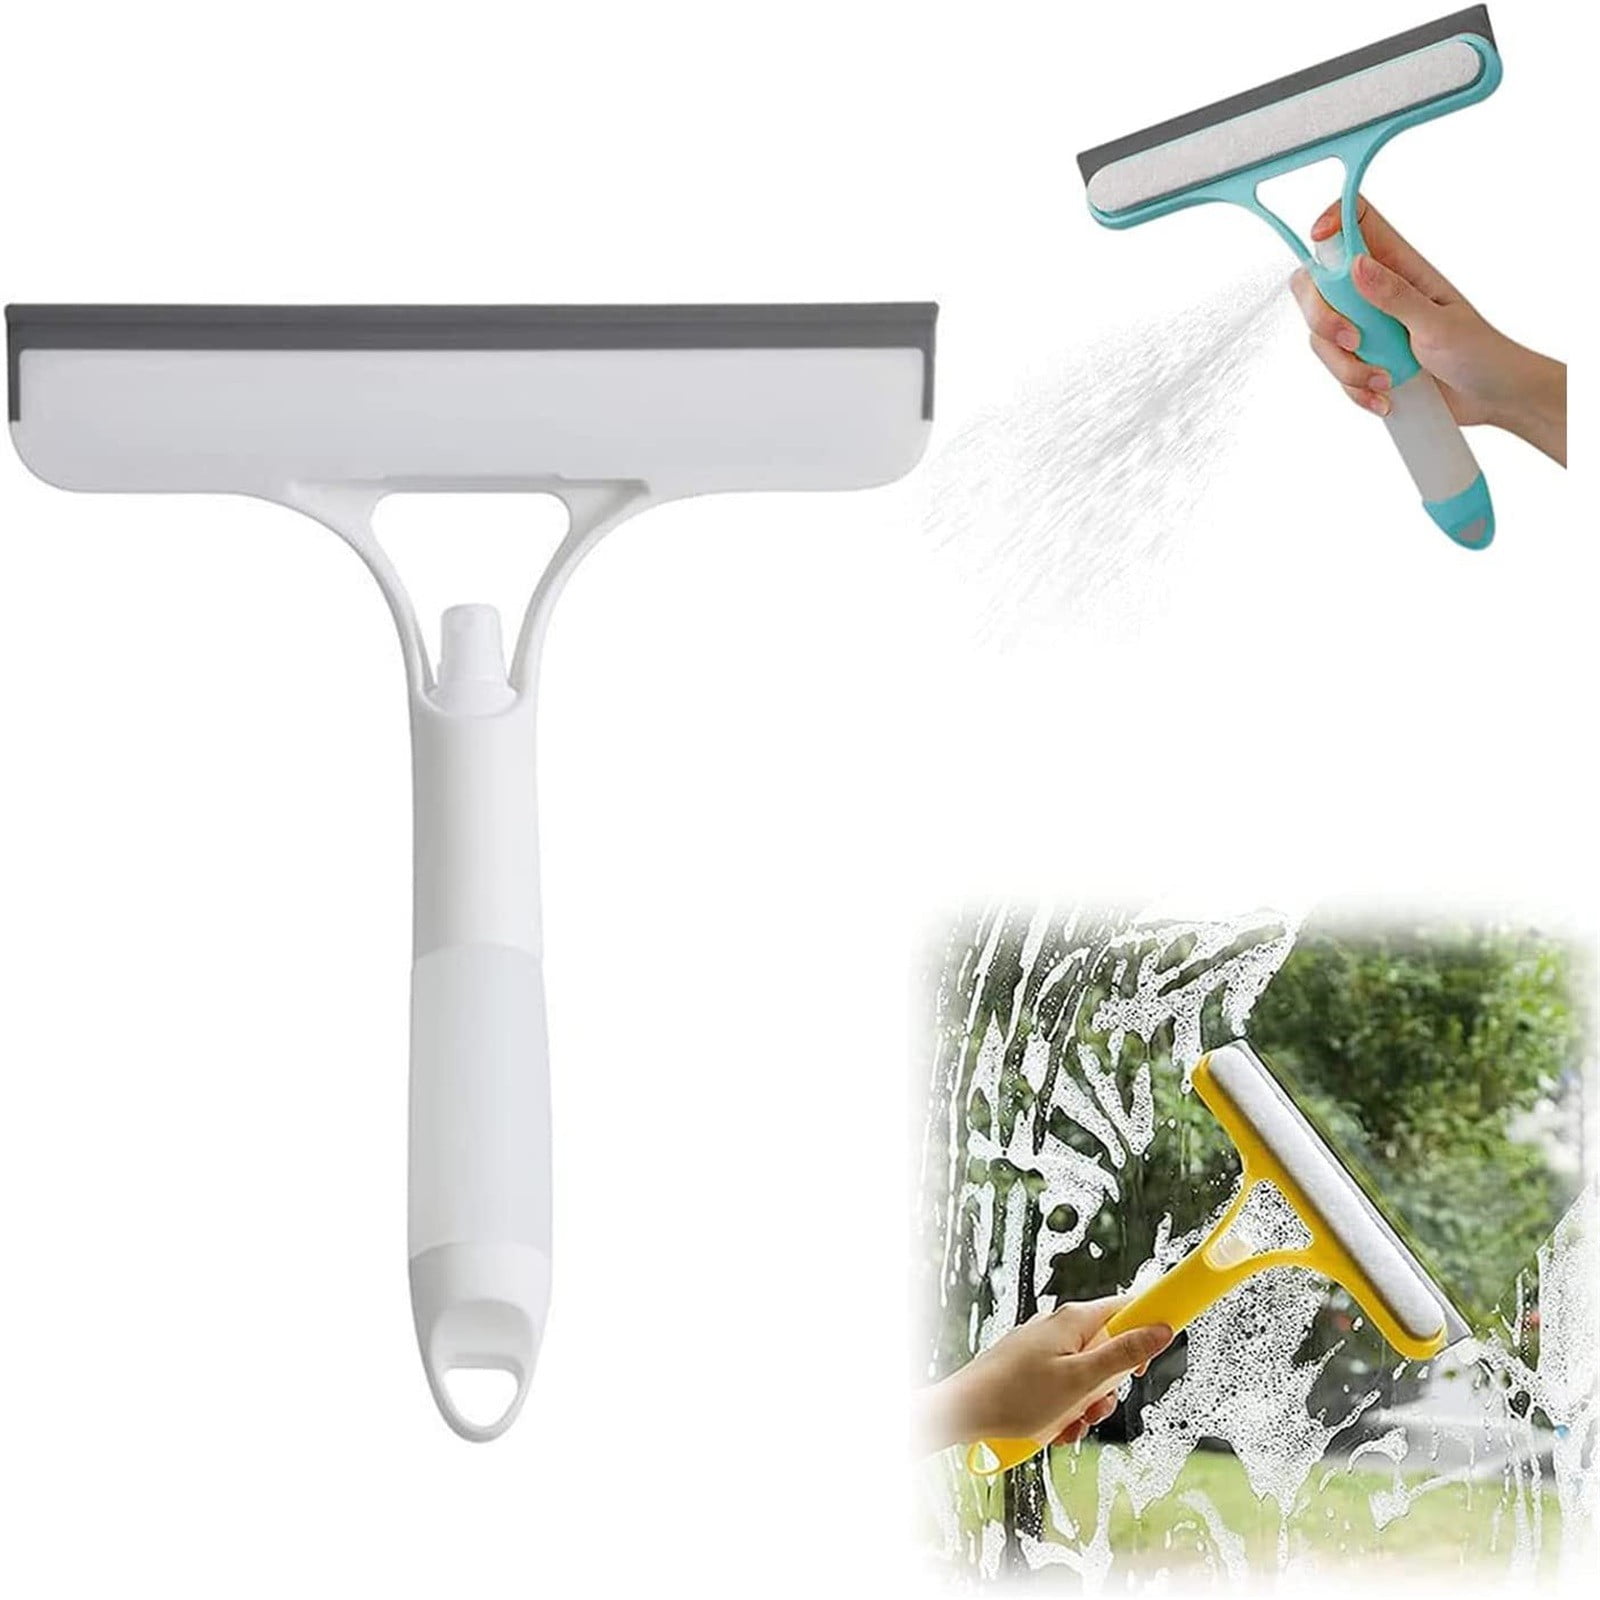 ITTAHO Car Windshield Squeegee with Extra Spray Bottle